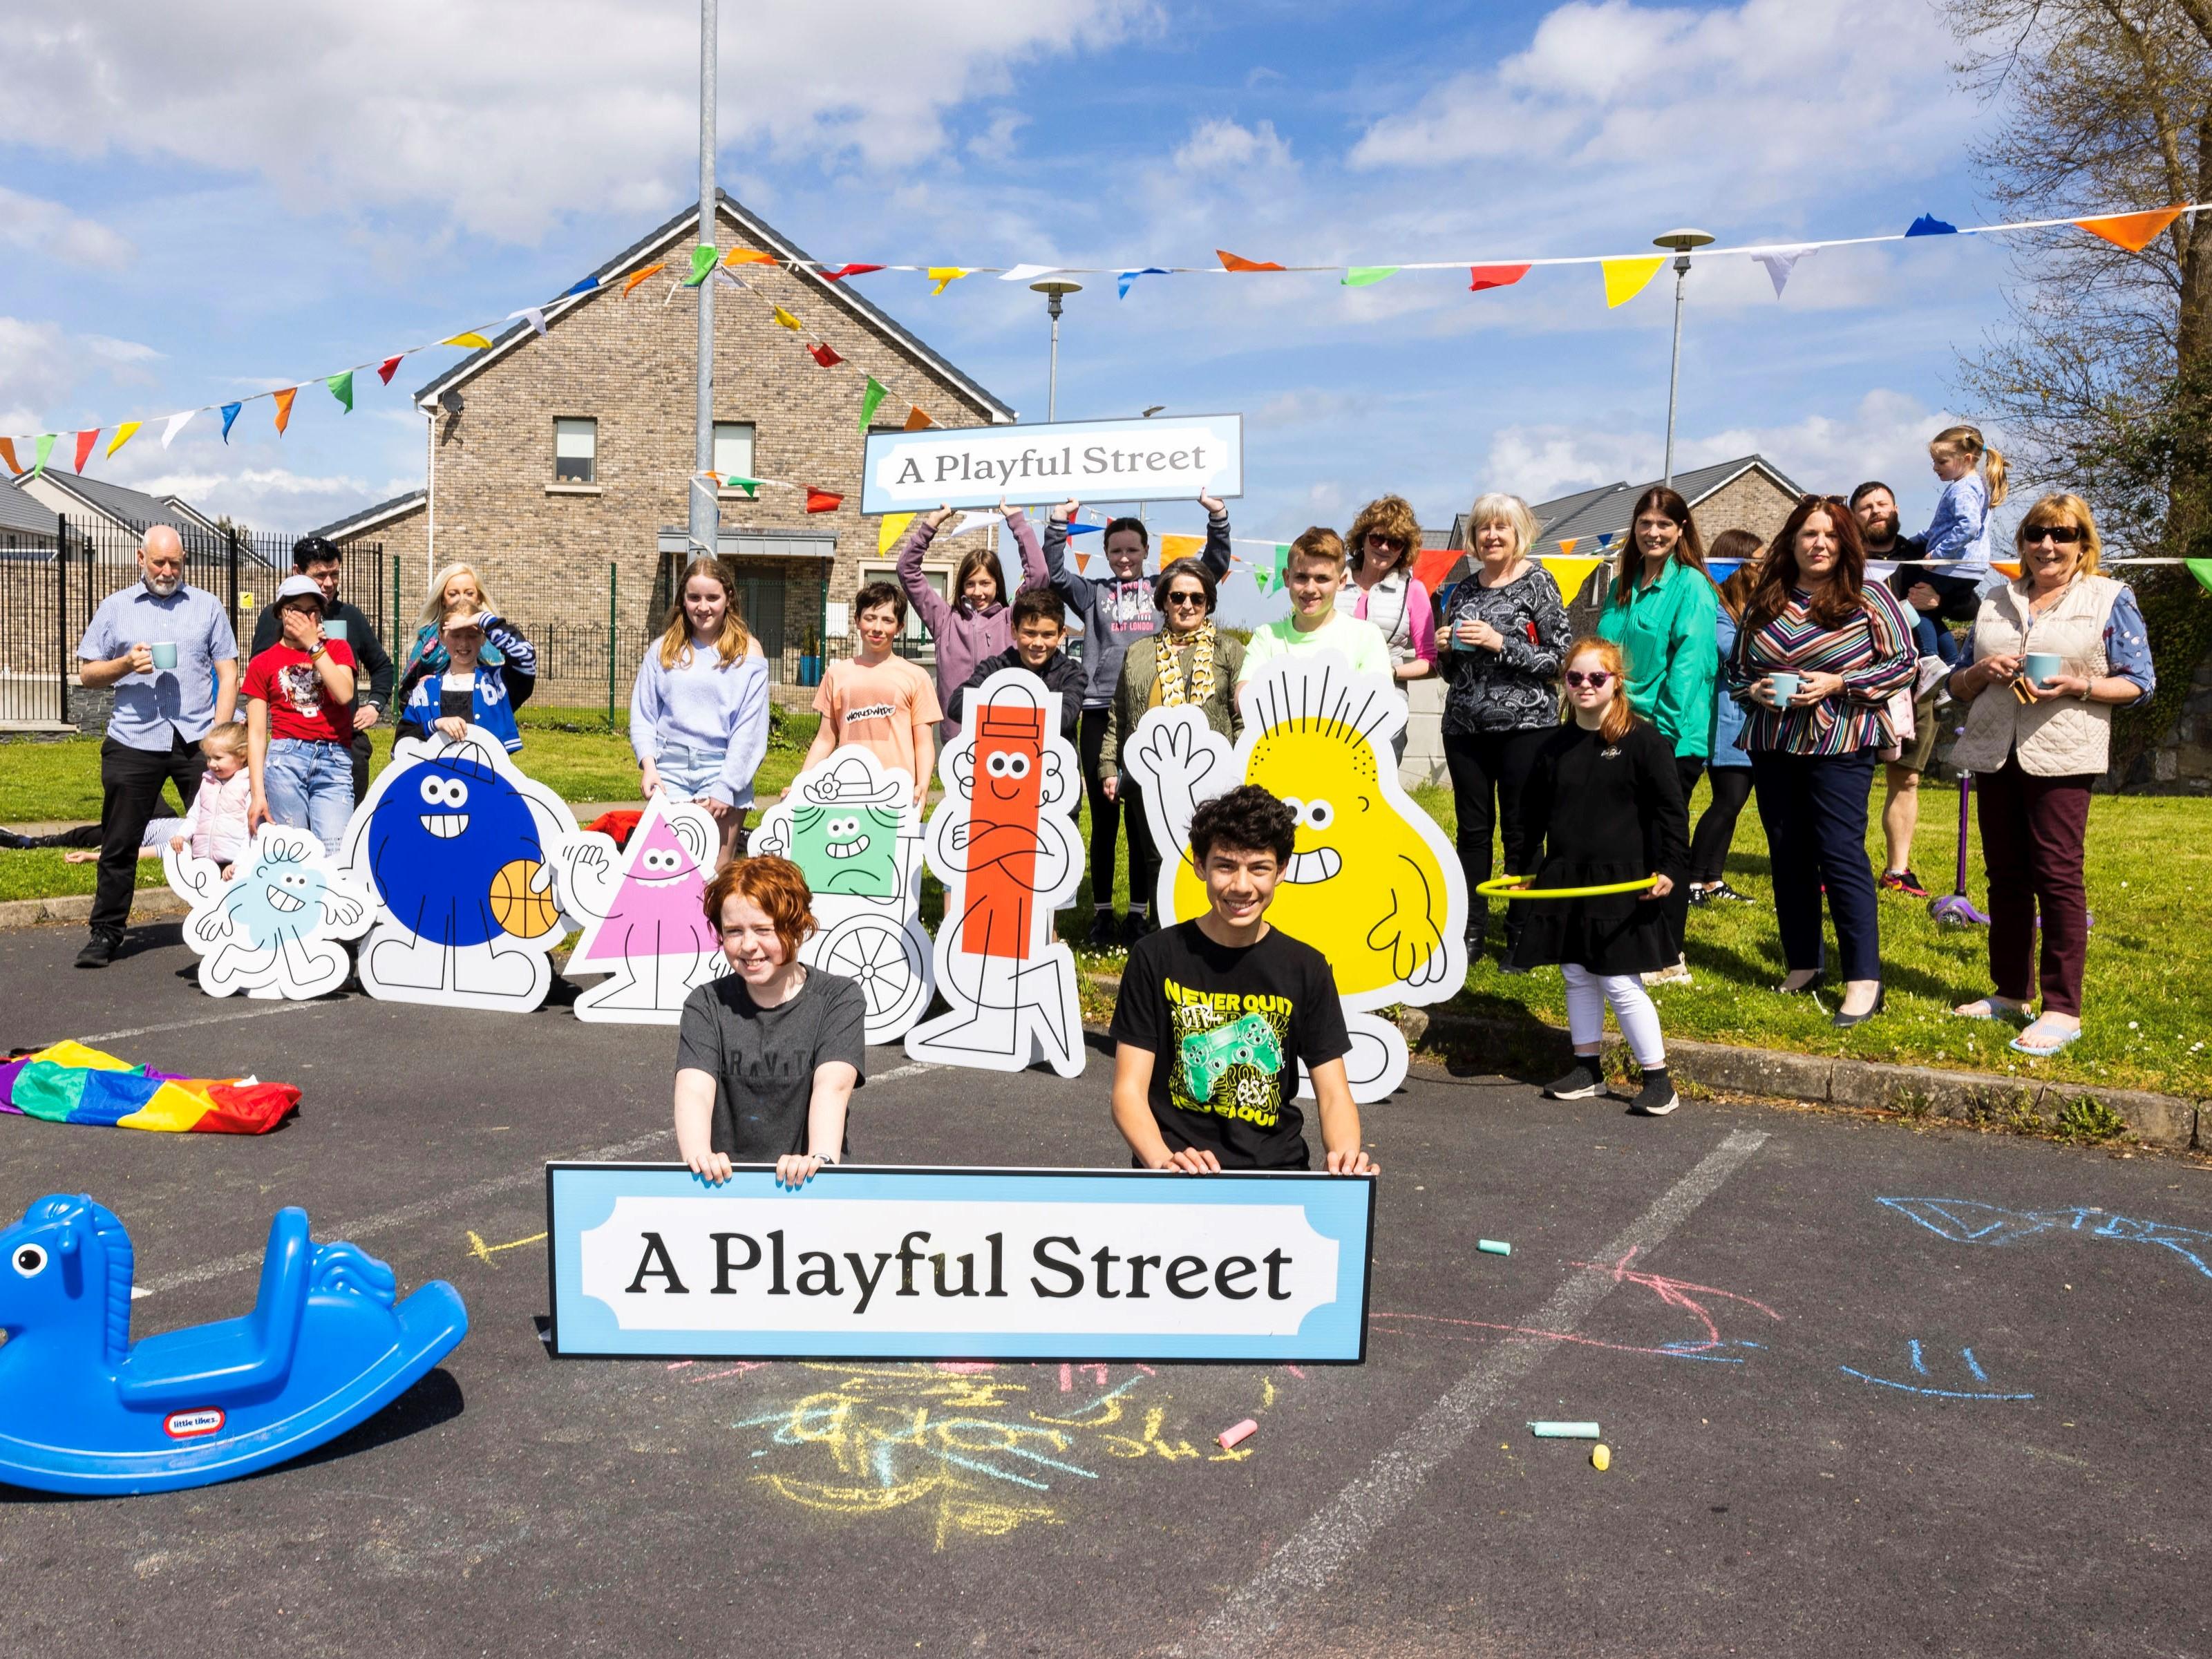 Pilots for Playful Streets will take place across the summer